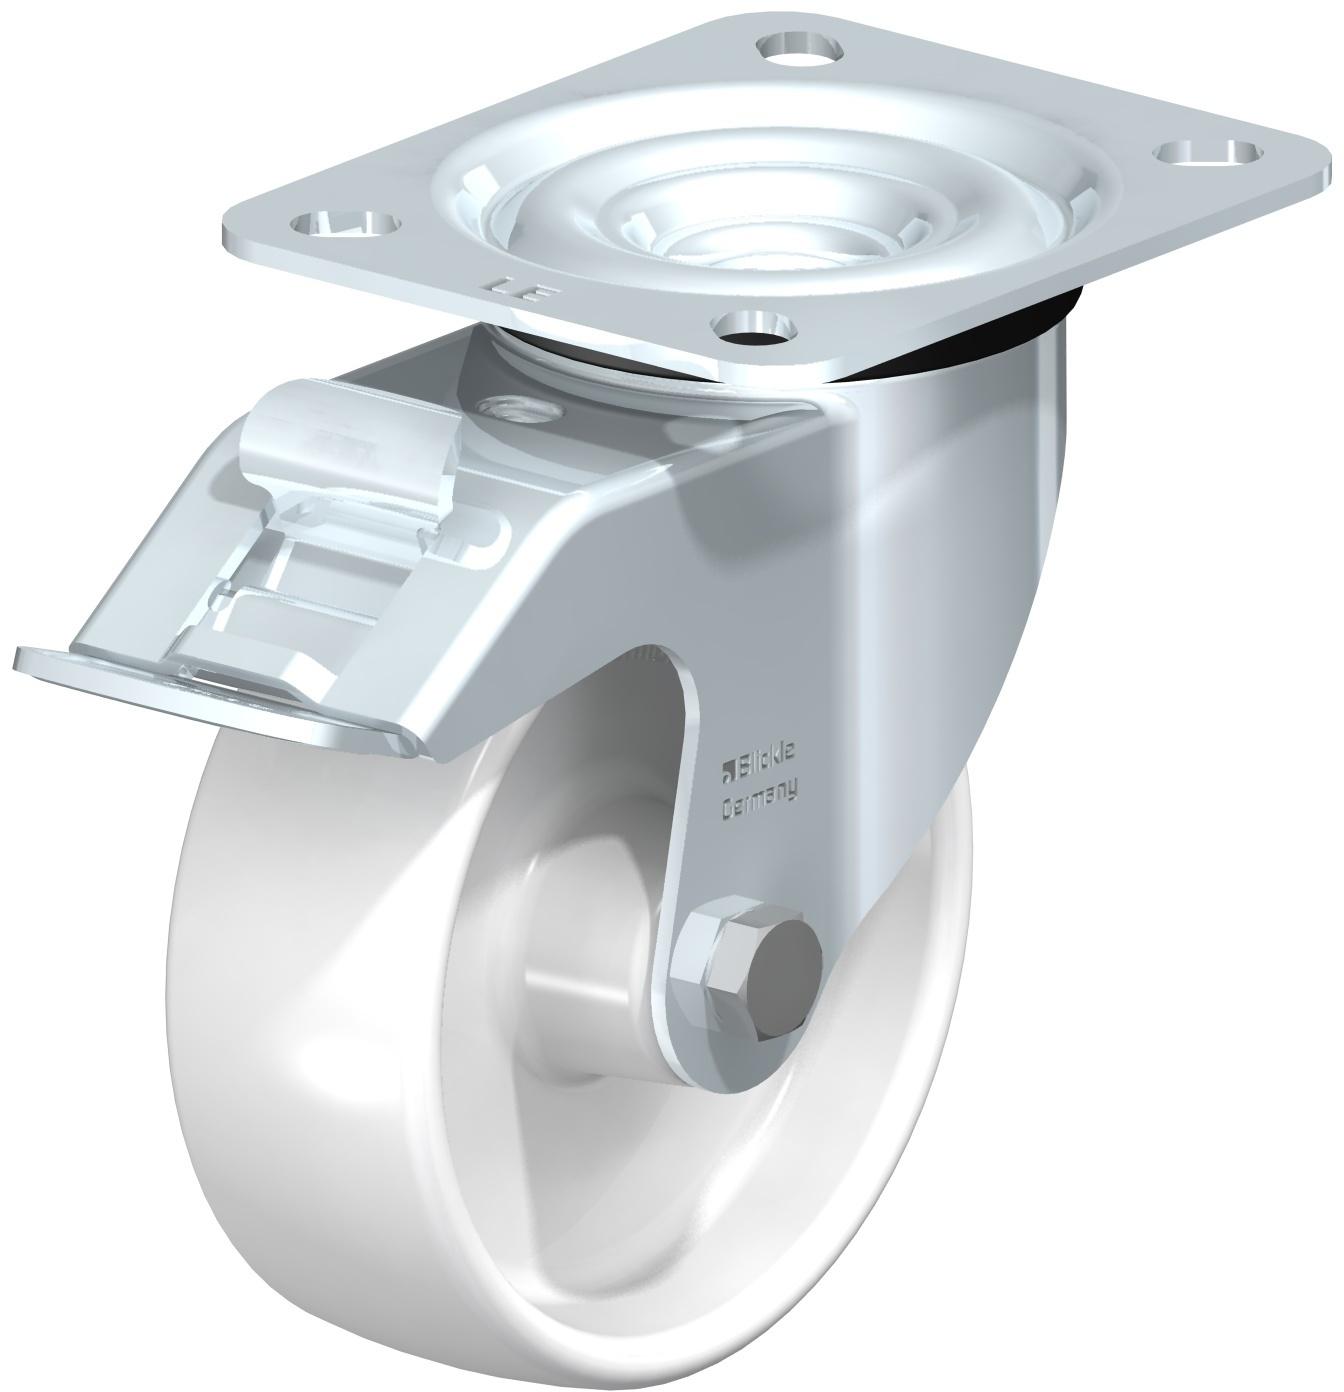 Bolt hole Ø	0,35
Plate size	3.94 x 3.35
Bolt hole spacing	3.15 x 2.36
Wheel Ø	3,9 inch (D)
Wheel width	1,457 inch (T2)
Load capacity	330 lbs
Total height	4,9 inch (H)
Offset swivel caster	1,4 inch
unit weight	1,6 lbs
Temperature resistance to	-13 °F
Temperature resistance to	176 °F
tread and tire hardness	70° Shore D
Bearing type:	Plain bore